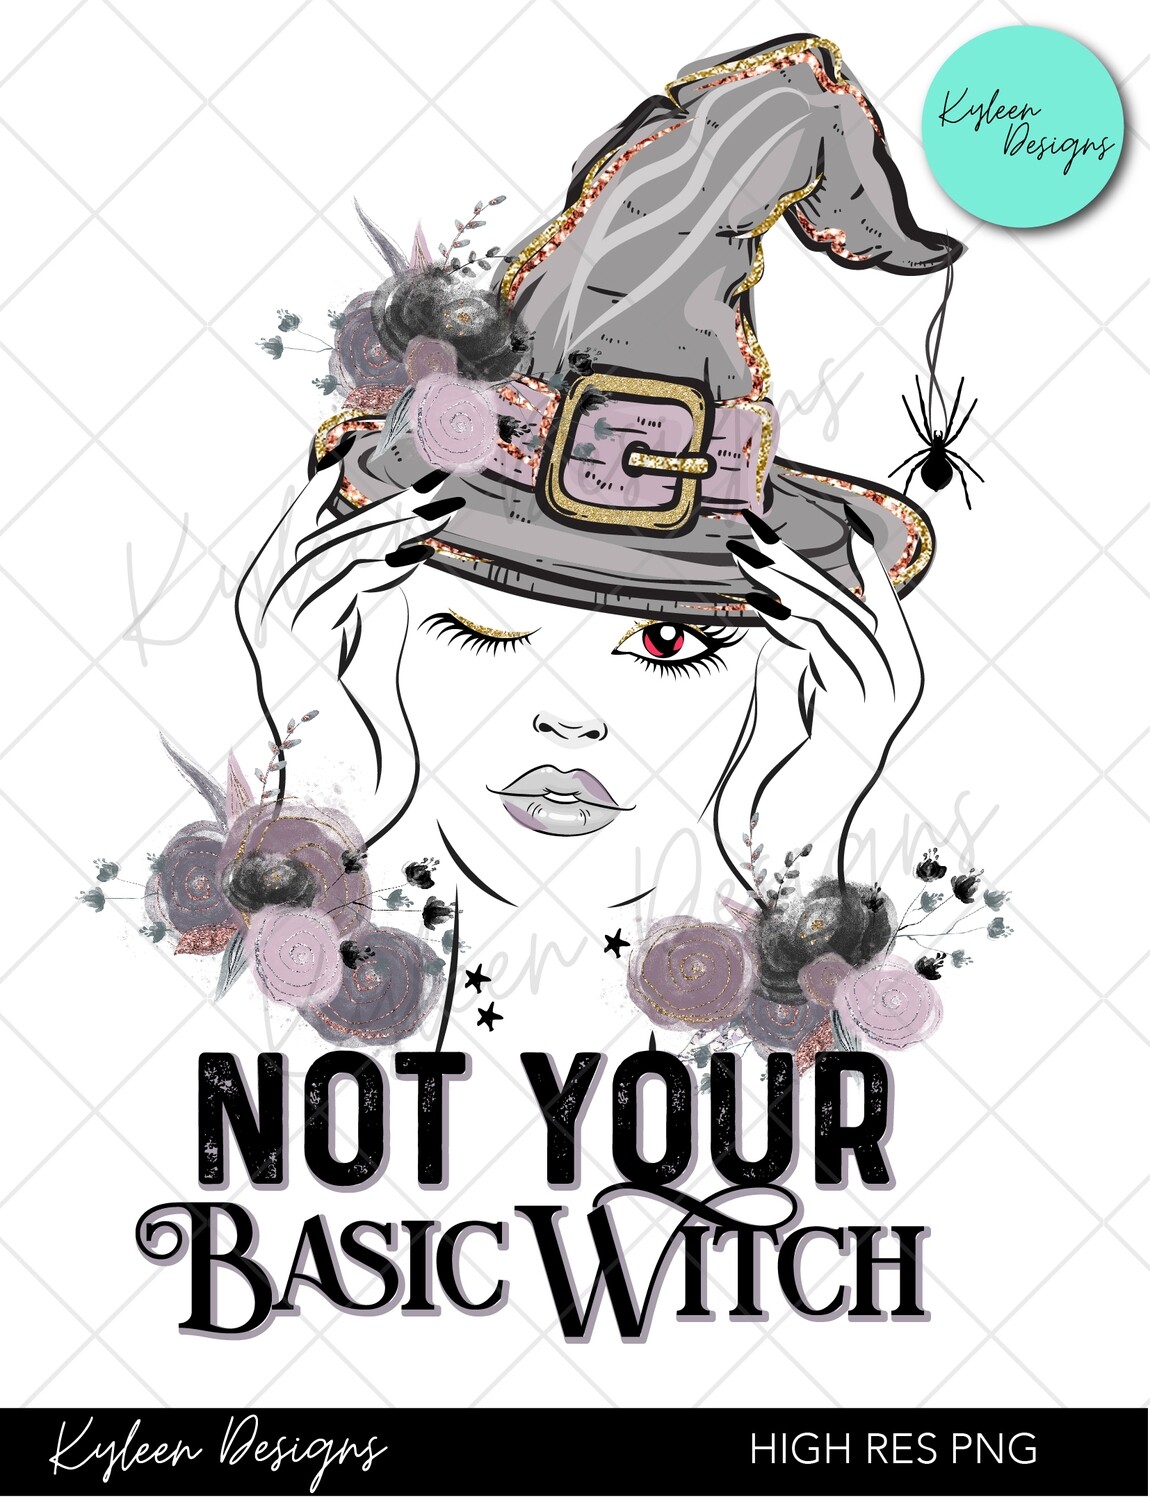 Not your basic witch high res PNG